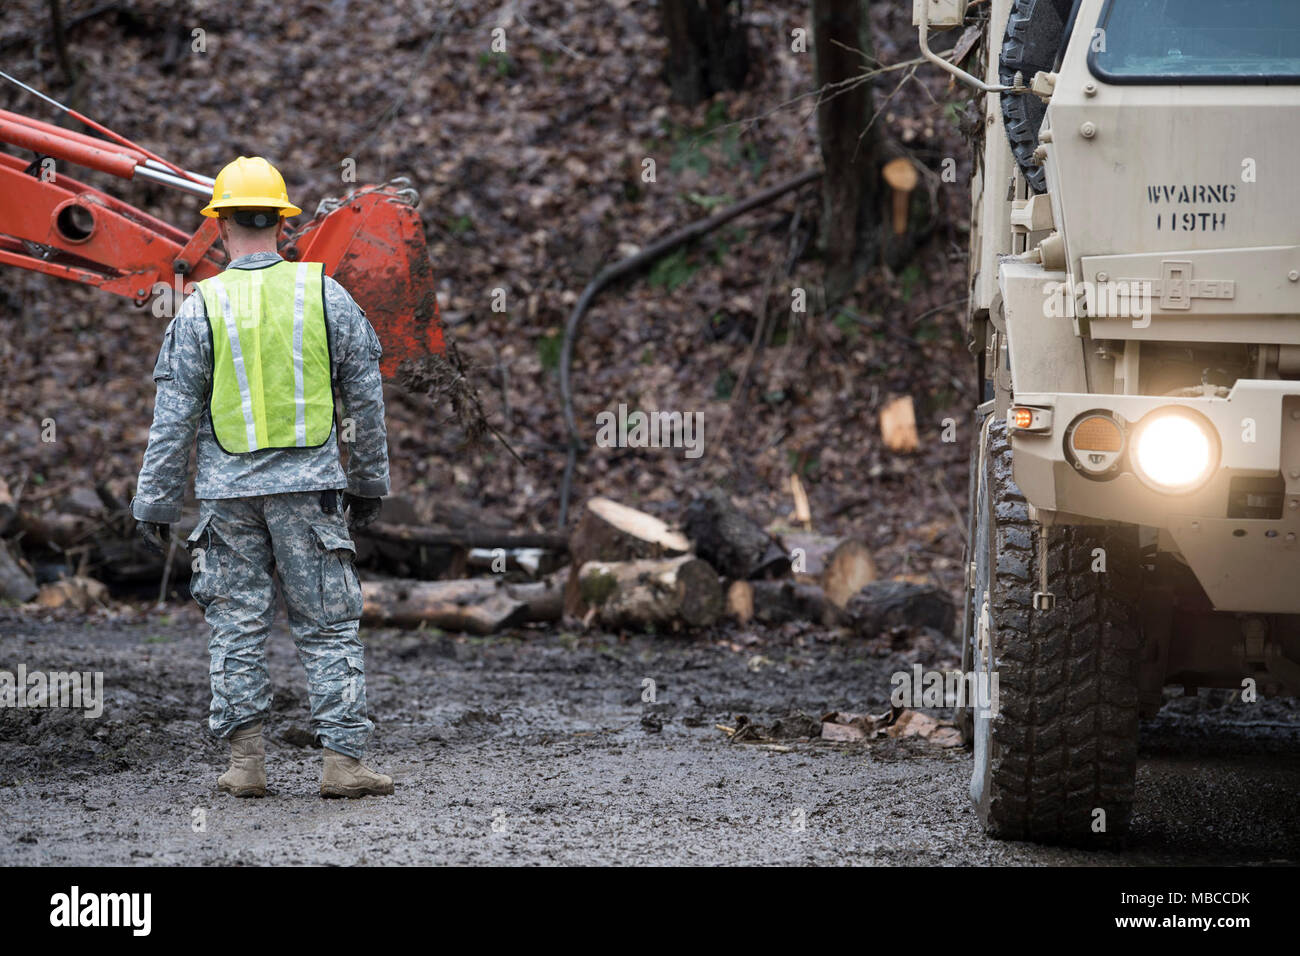 Staff Sgt. Kevin Smith, a combat engineer and non-commissioned officer in charge for the 119th Sapper Engineer Company, West Virginia National Guard, watches as crews load heavy debris into trucks following flooding in Ohio County, West Virginia Feb. 19, 2018. WVNG Soldiers provided equipment for small and large debris removal and helped local residents and city crews to remove more than 128 tons of debris from the area. (U.S. Air National Guard Stock Photo